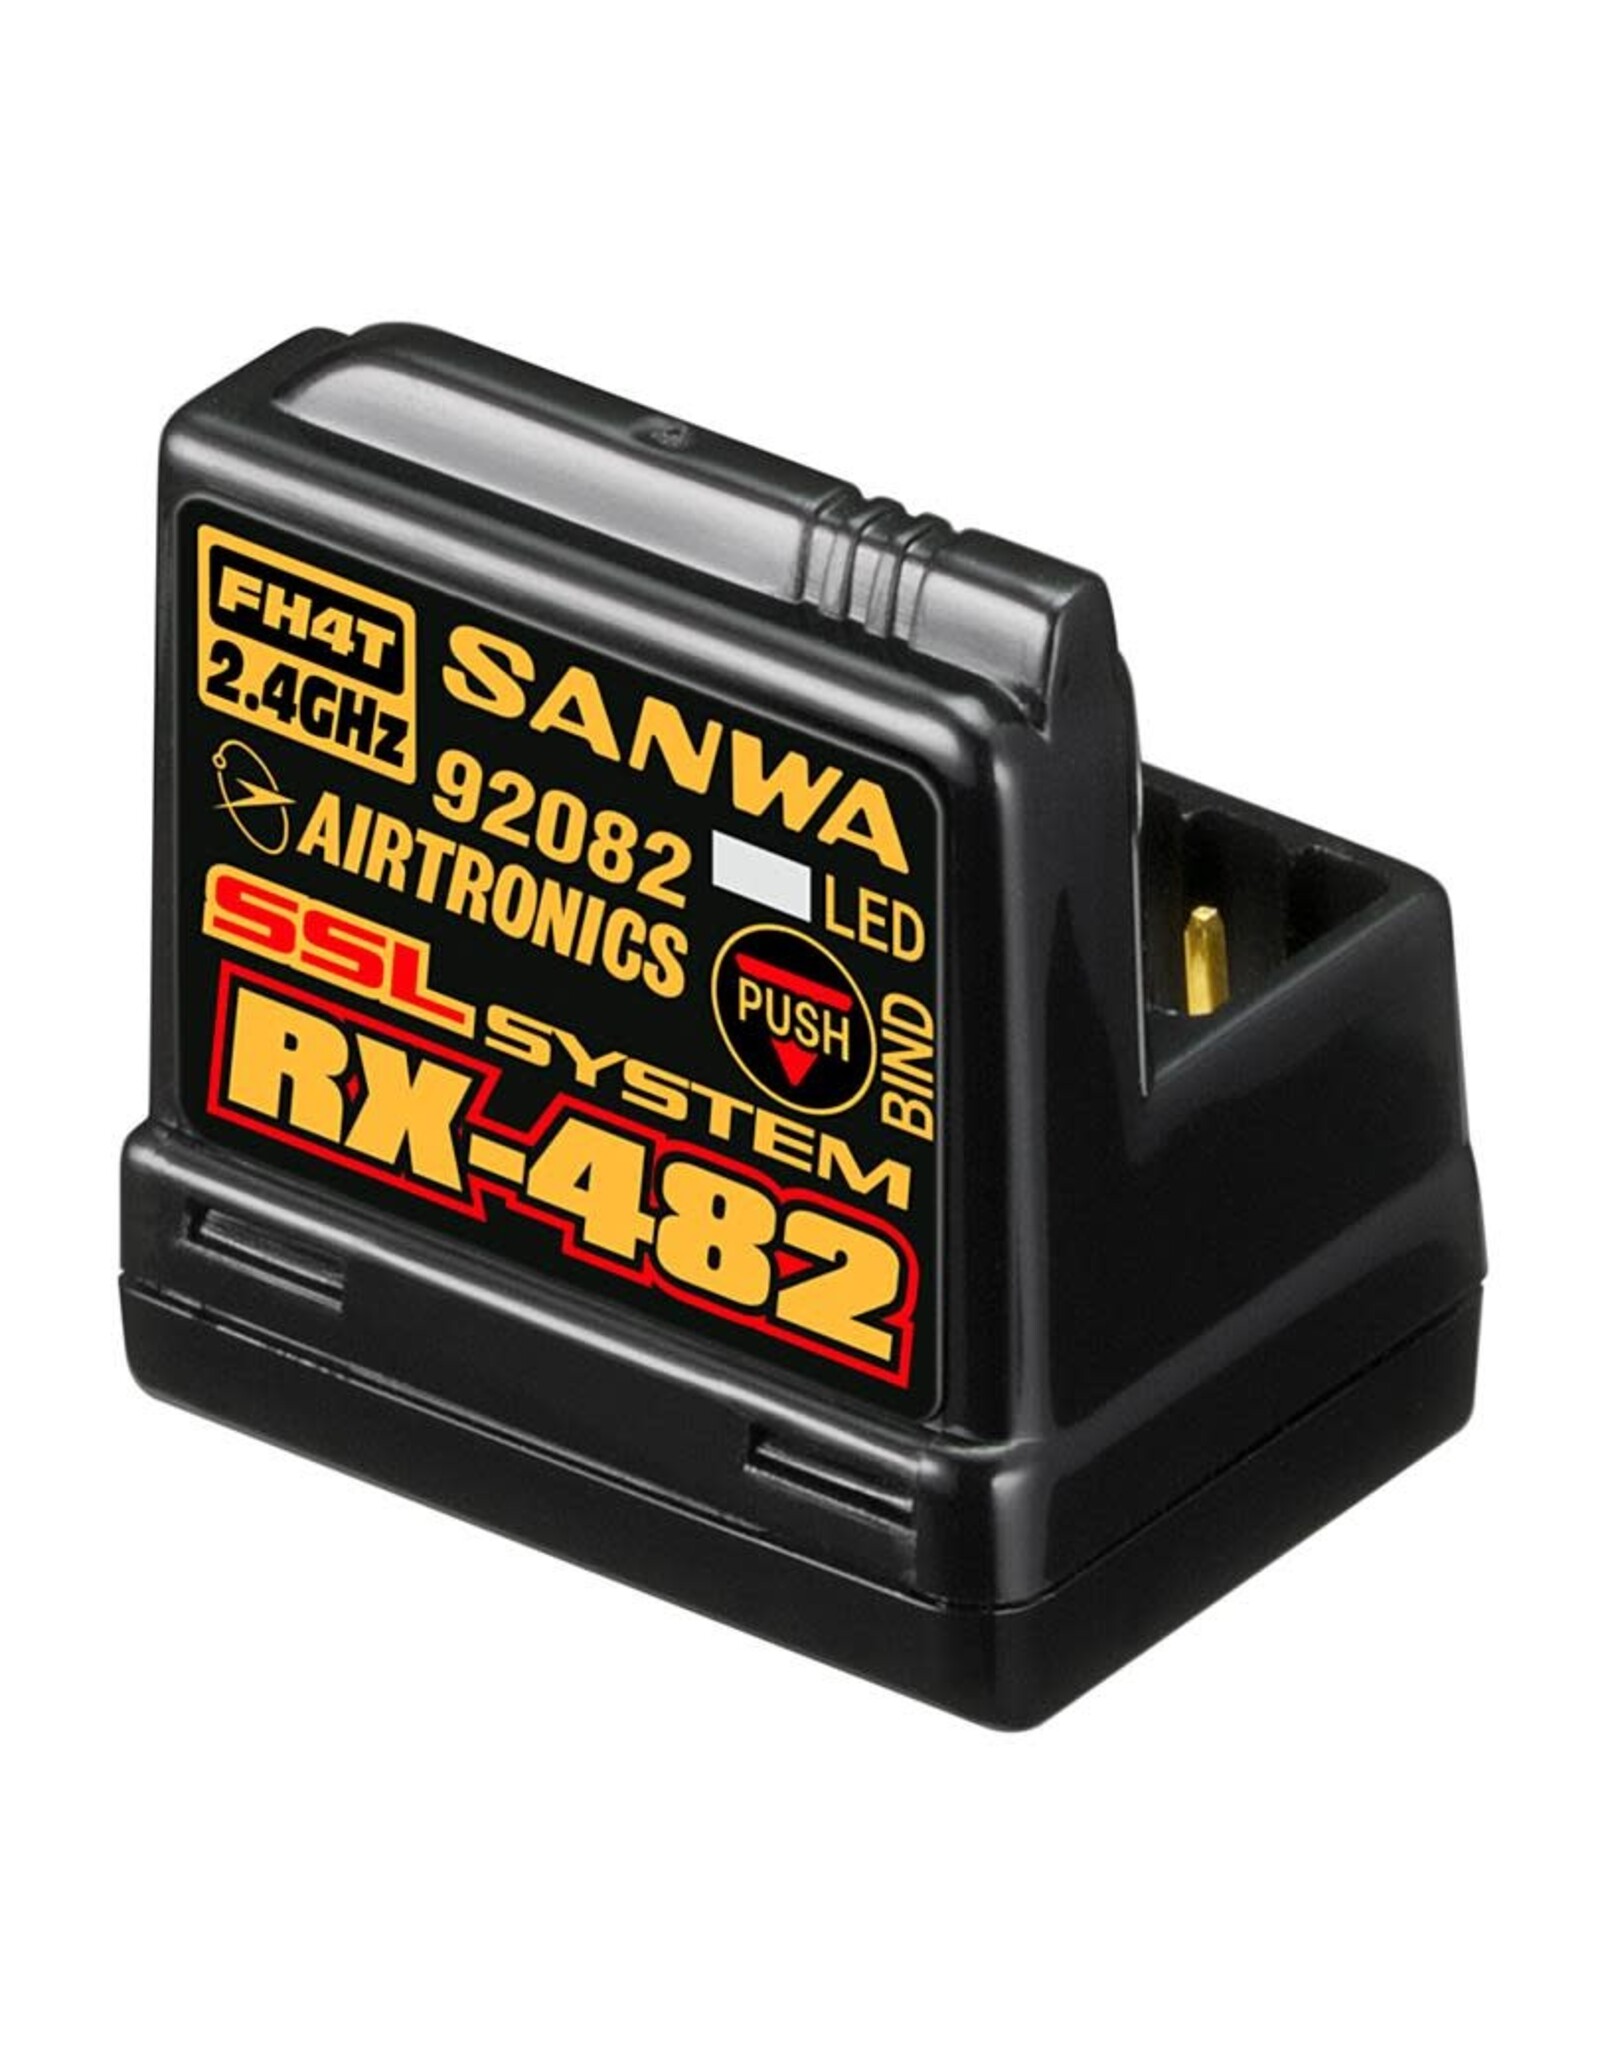 Sanwa Sanwa 4-channel RX482 Telemetry Receiver w/ built-in Antenna